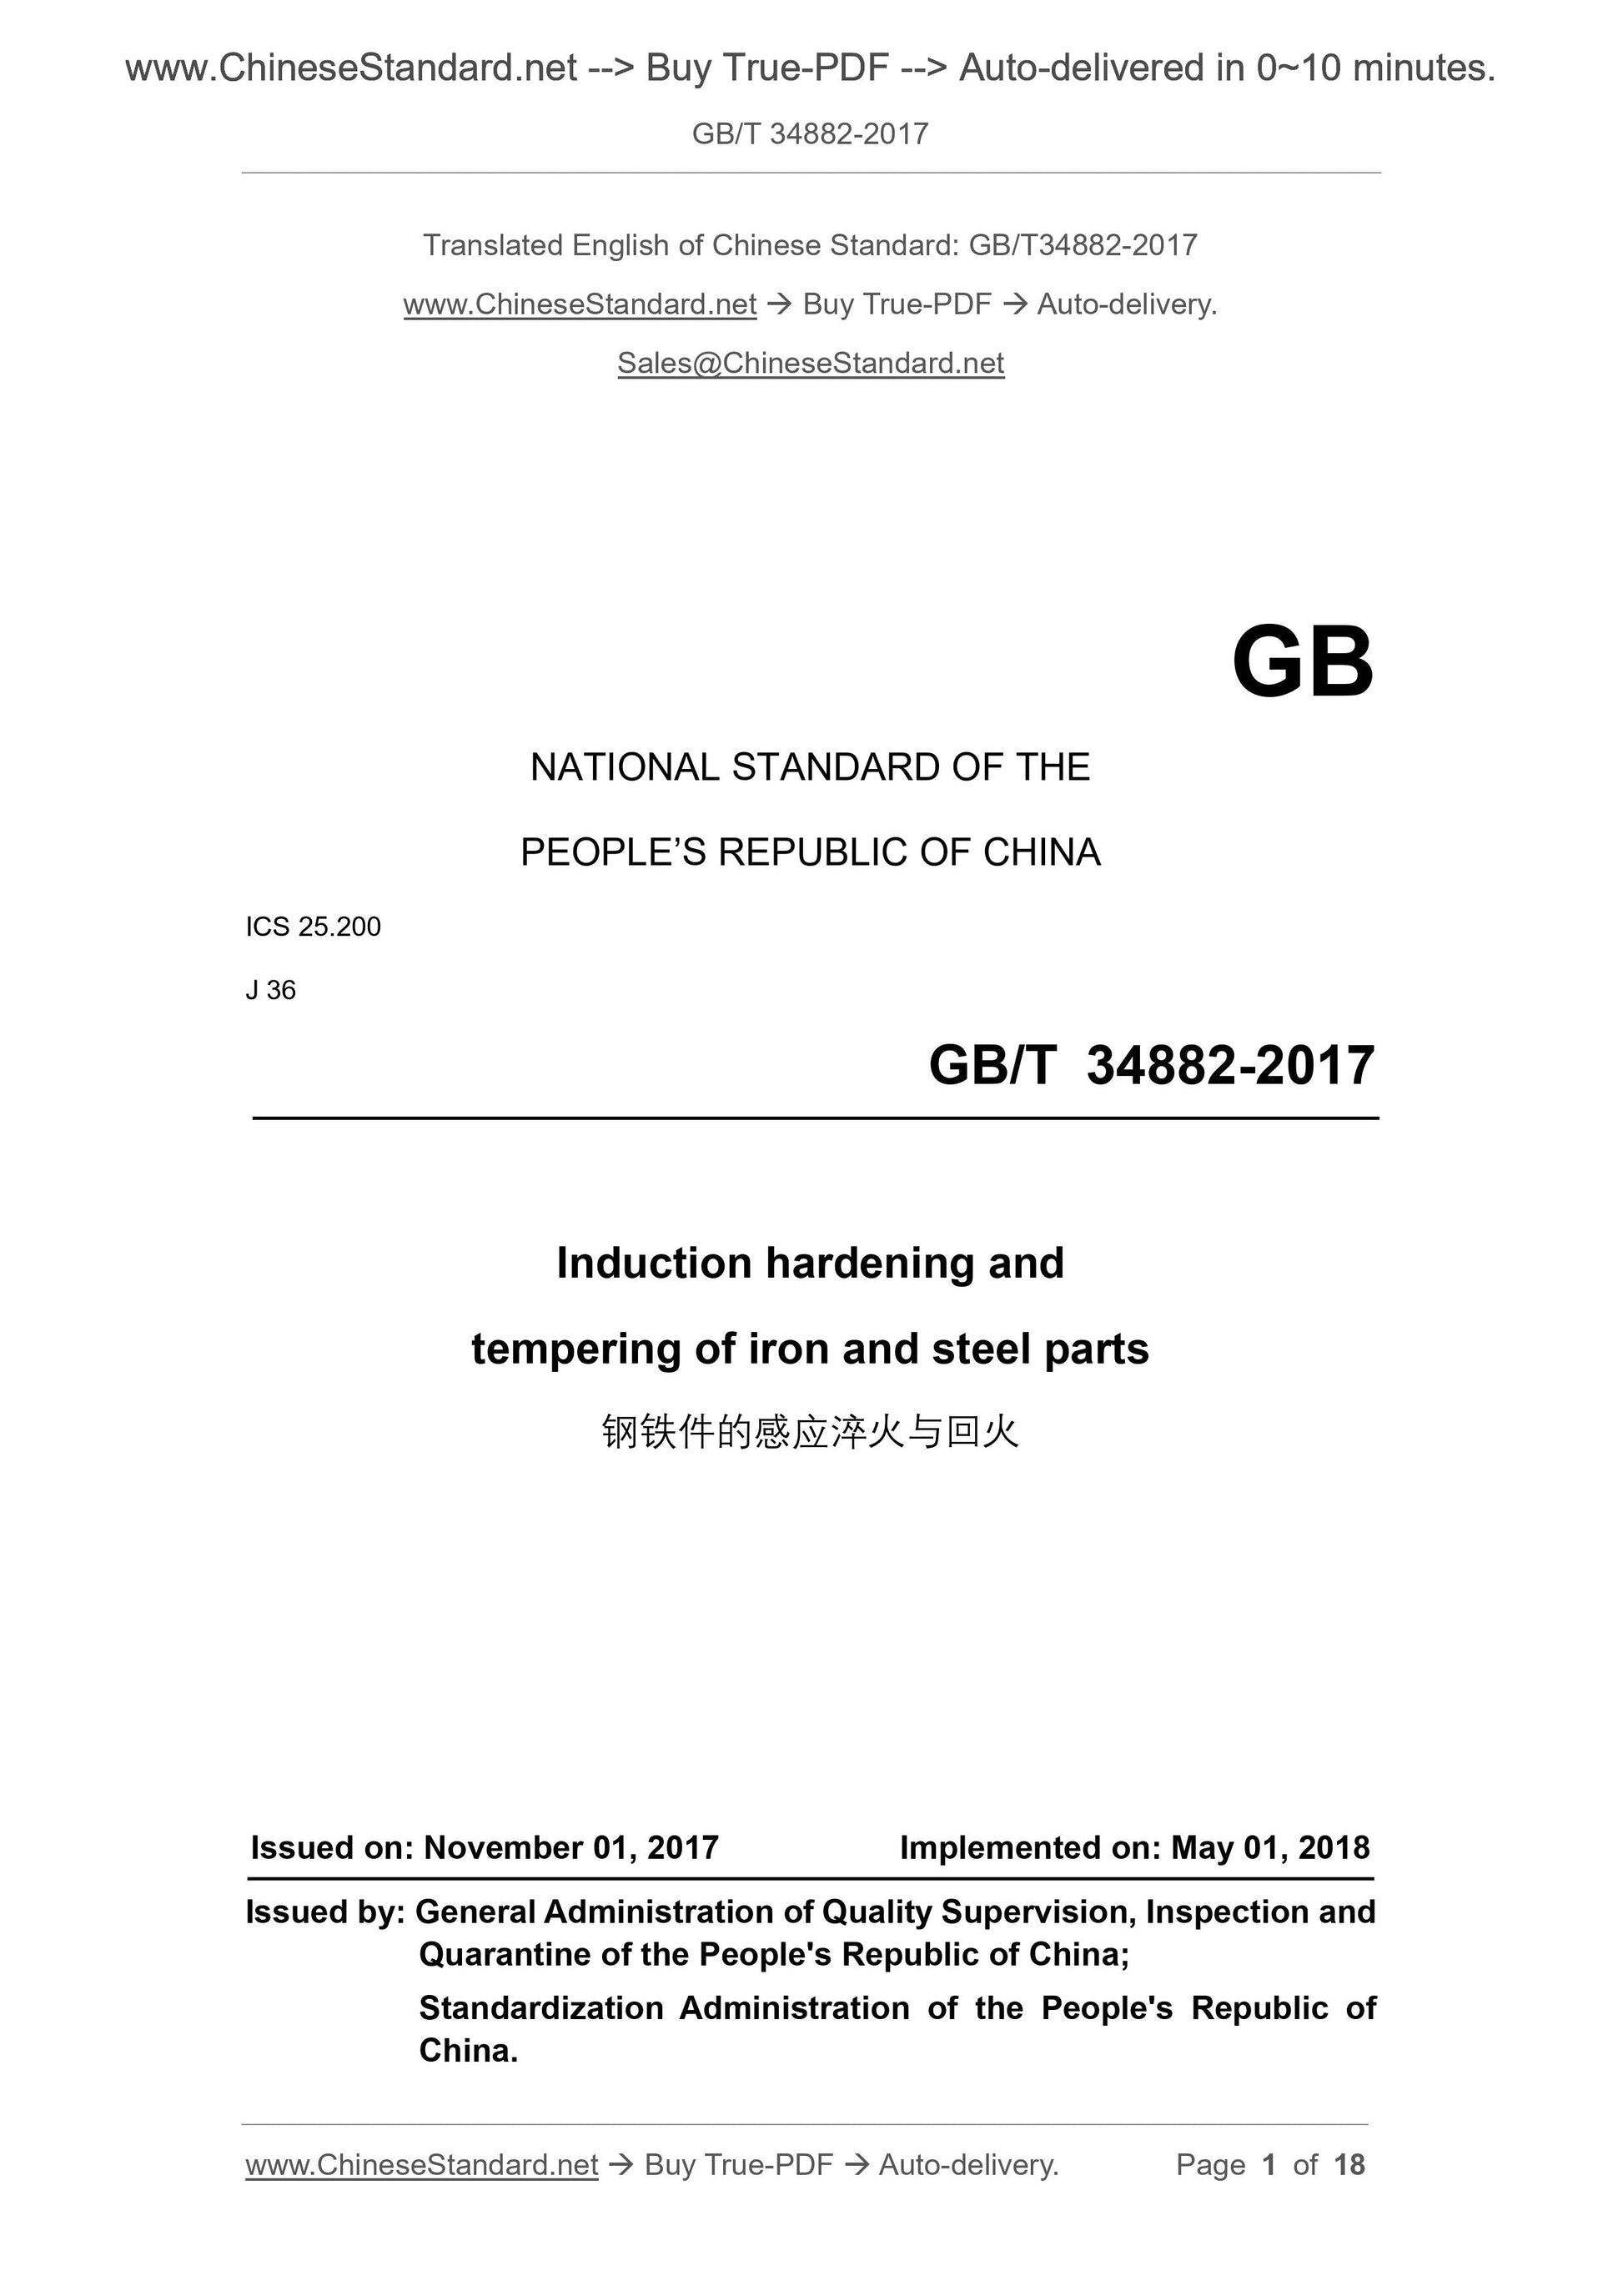 GB/T 34882-2017 Page 1